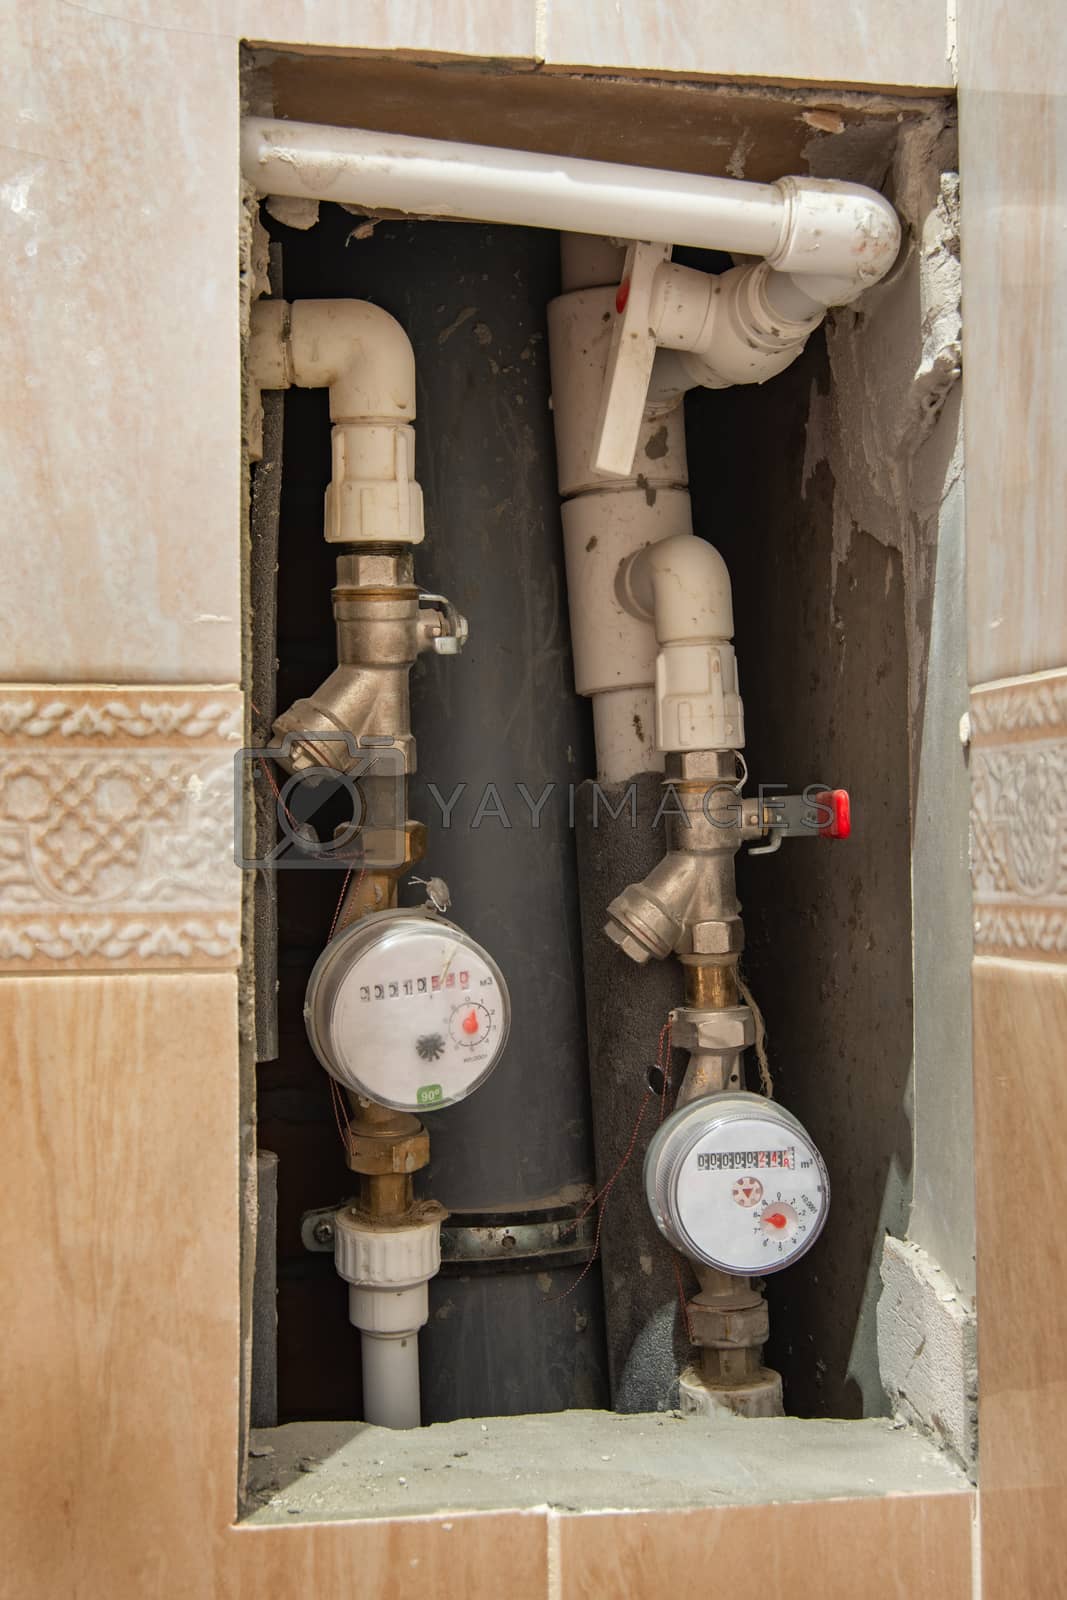 Royalty free image of cold and hot water meters embedded in the wall by Madhourse